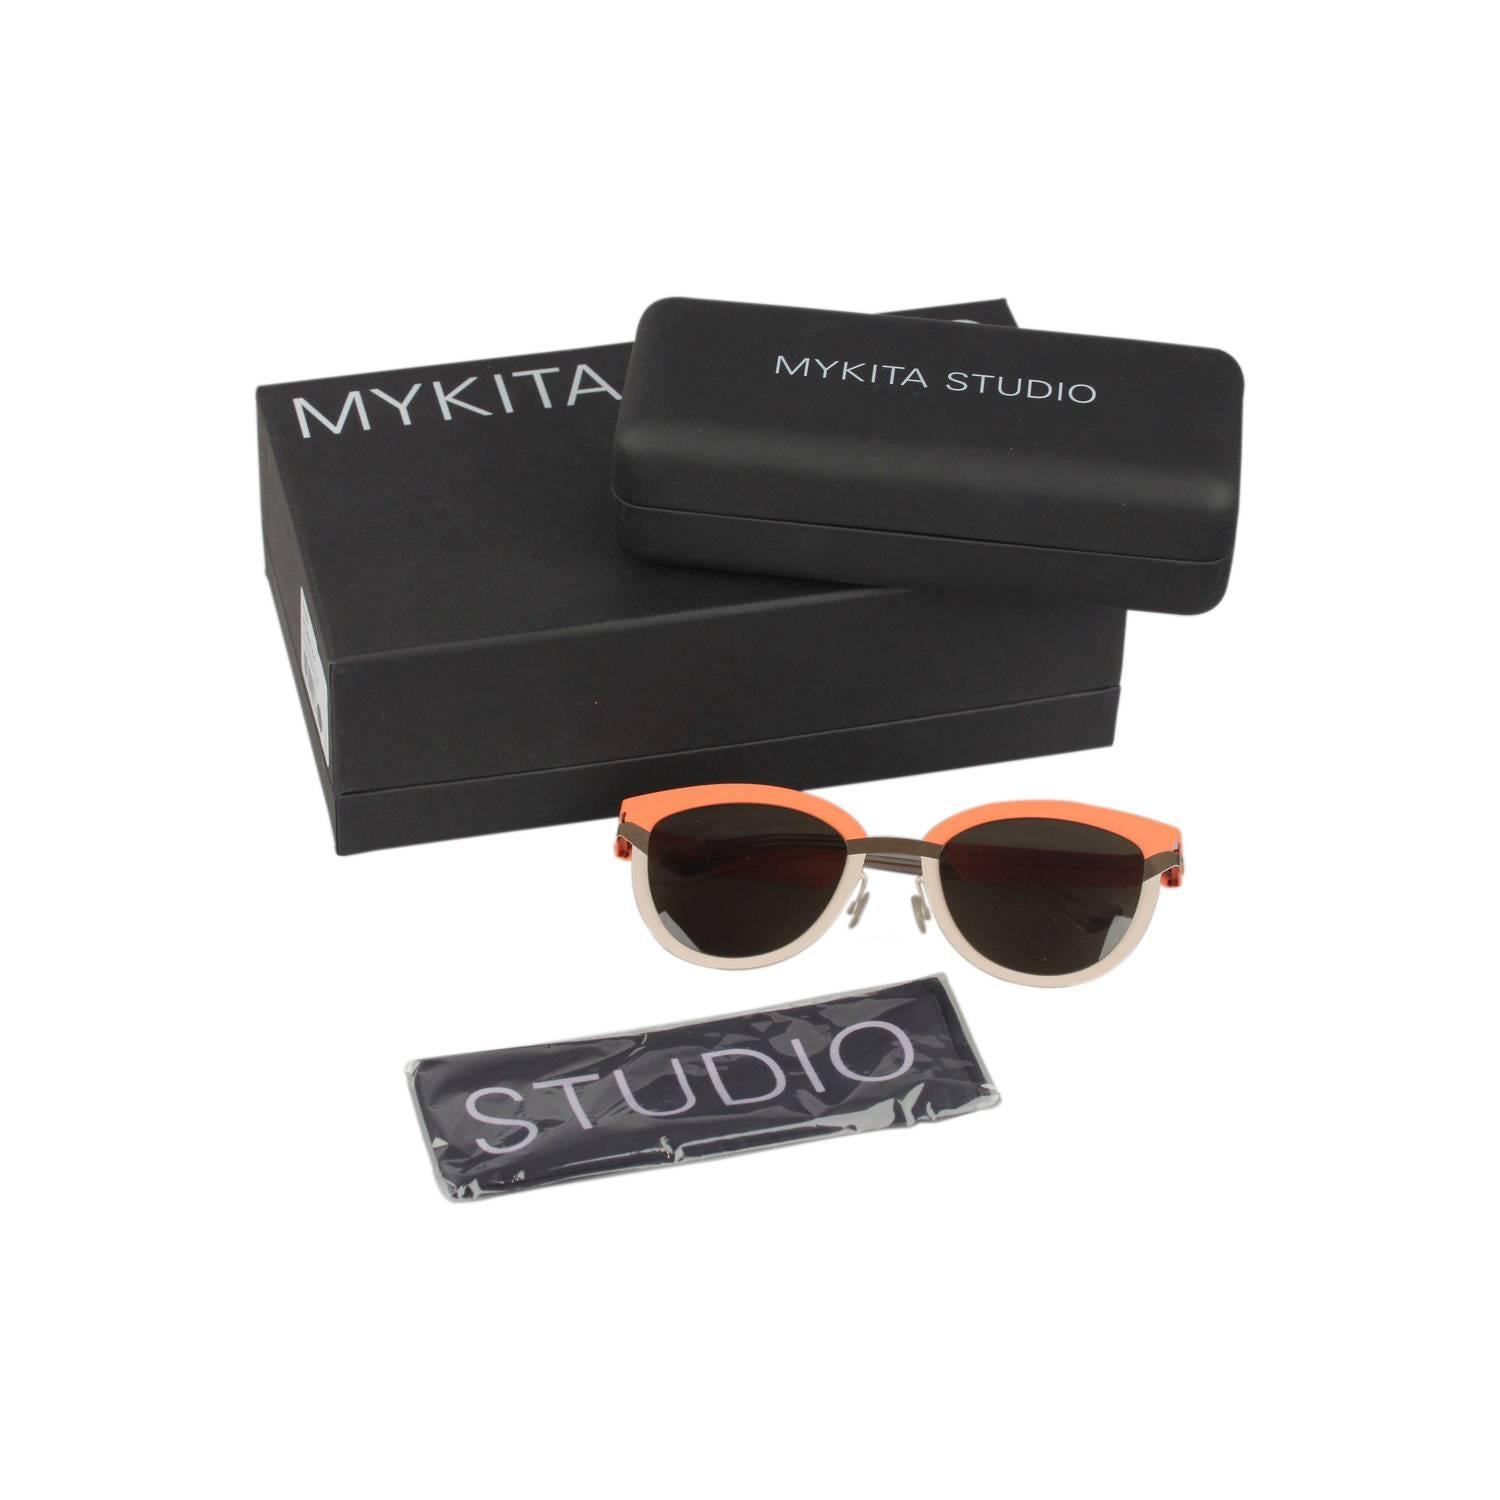 MYKITA STUDIO Sunglasses
Frame: S8 Tangerine Desert Modules
Lens: Raw Green Solid
Size 140 - Col. 959 - 55/24
Handmade in Germany
It will come with its original hard case, cleaning cloth and Shop case
GENTLY USED - no visible scratch or